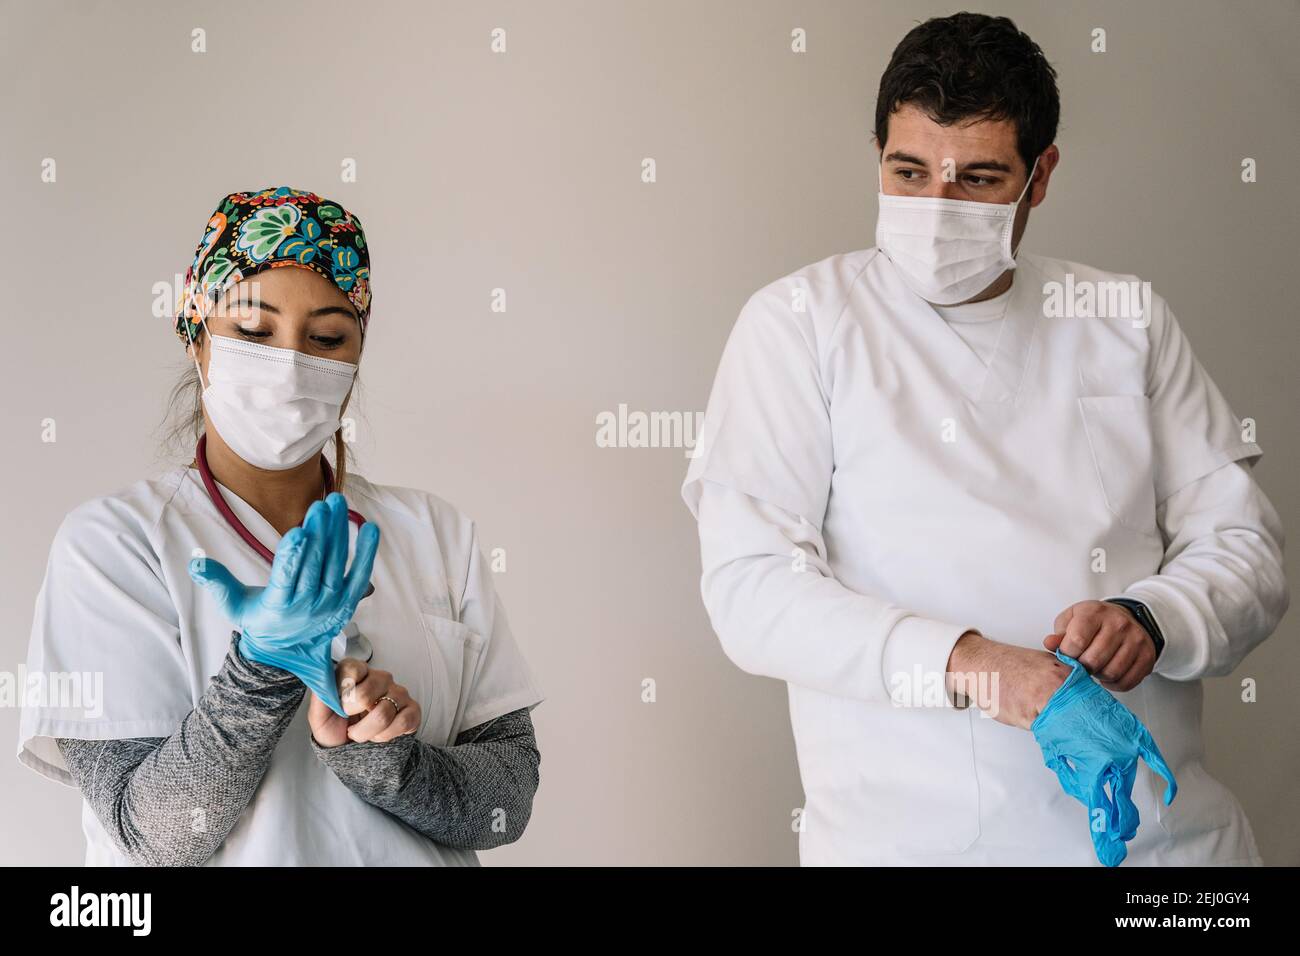 Male and female doctors in medical masks standing in hospital and putting on protective latex gloves while working during coronavirus pandemic Stock Photo